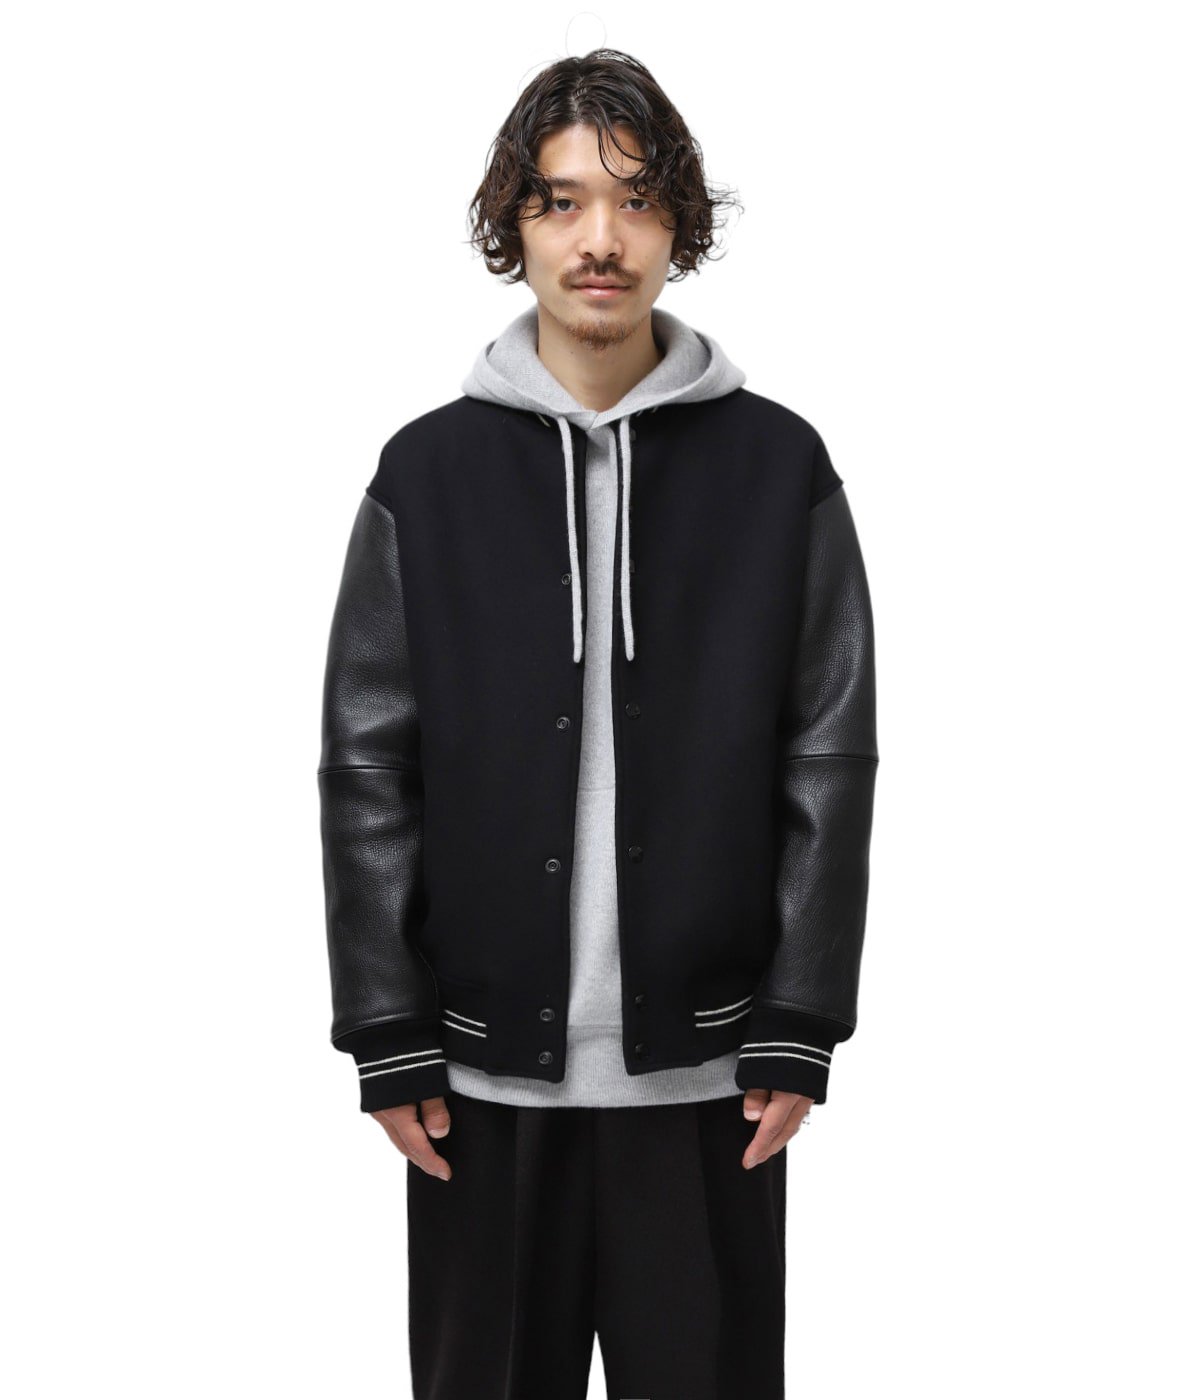 T-ポイント5倍】 【新品タグ付き】Standard Double Cloth Jacket